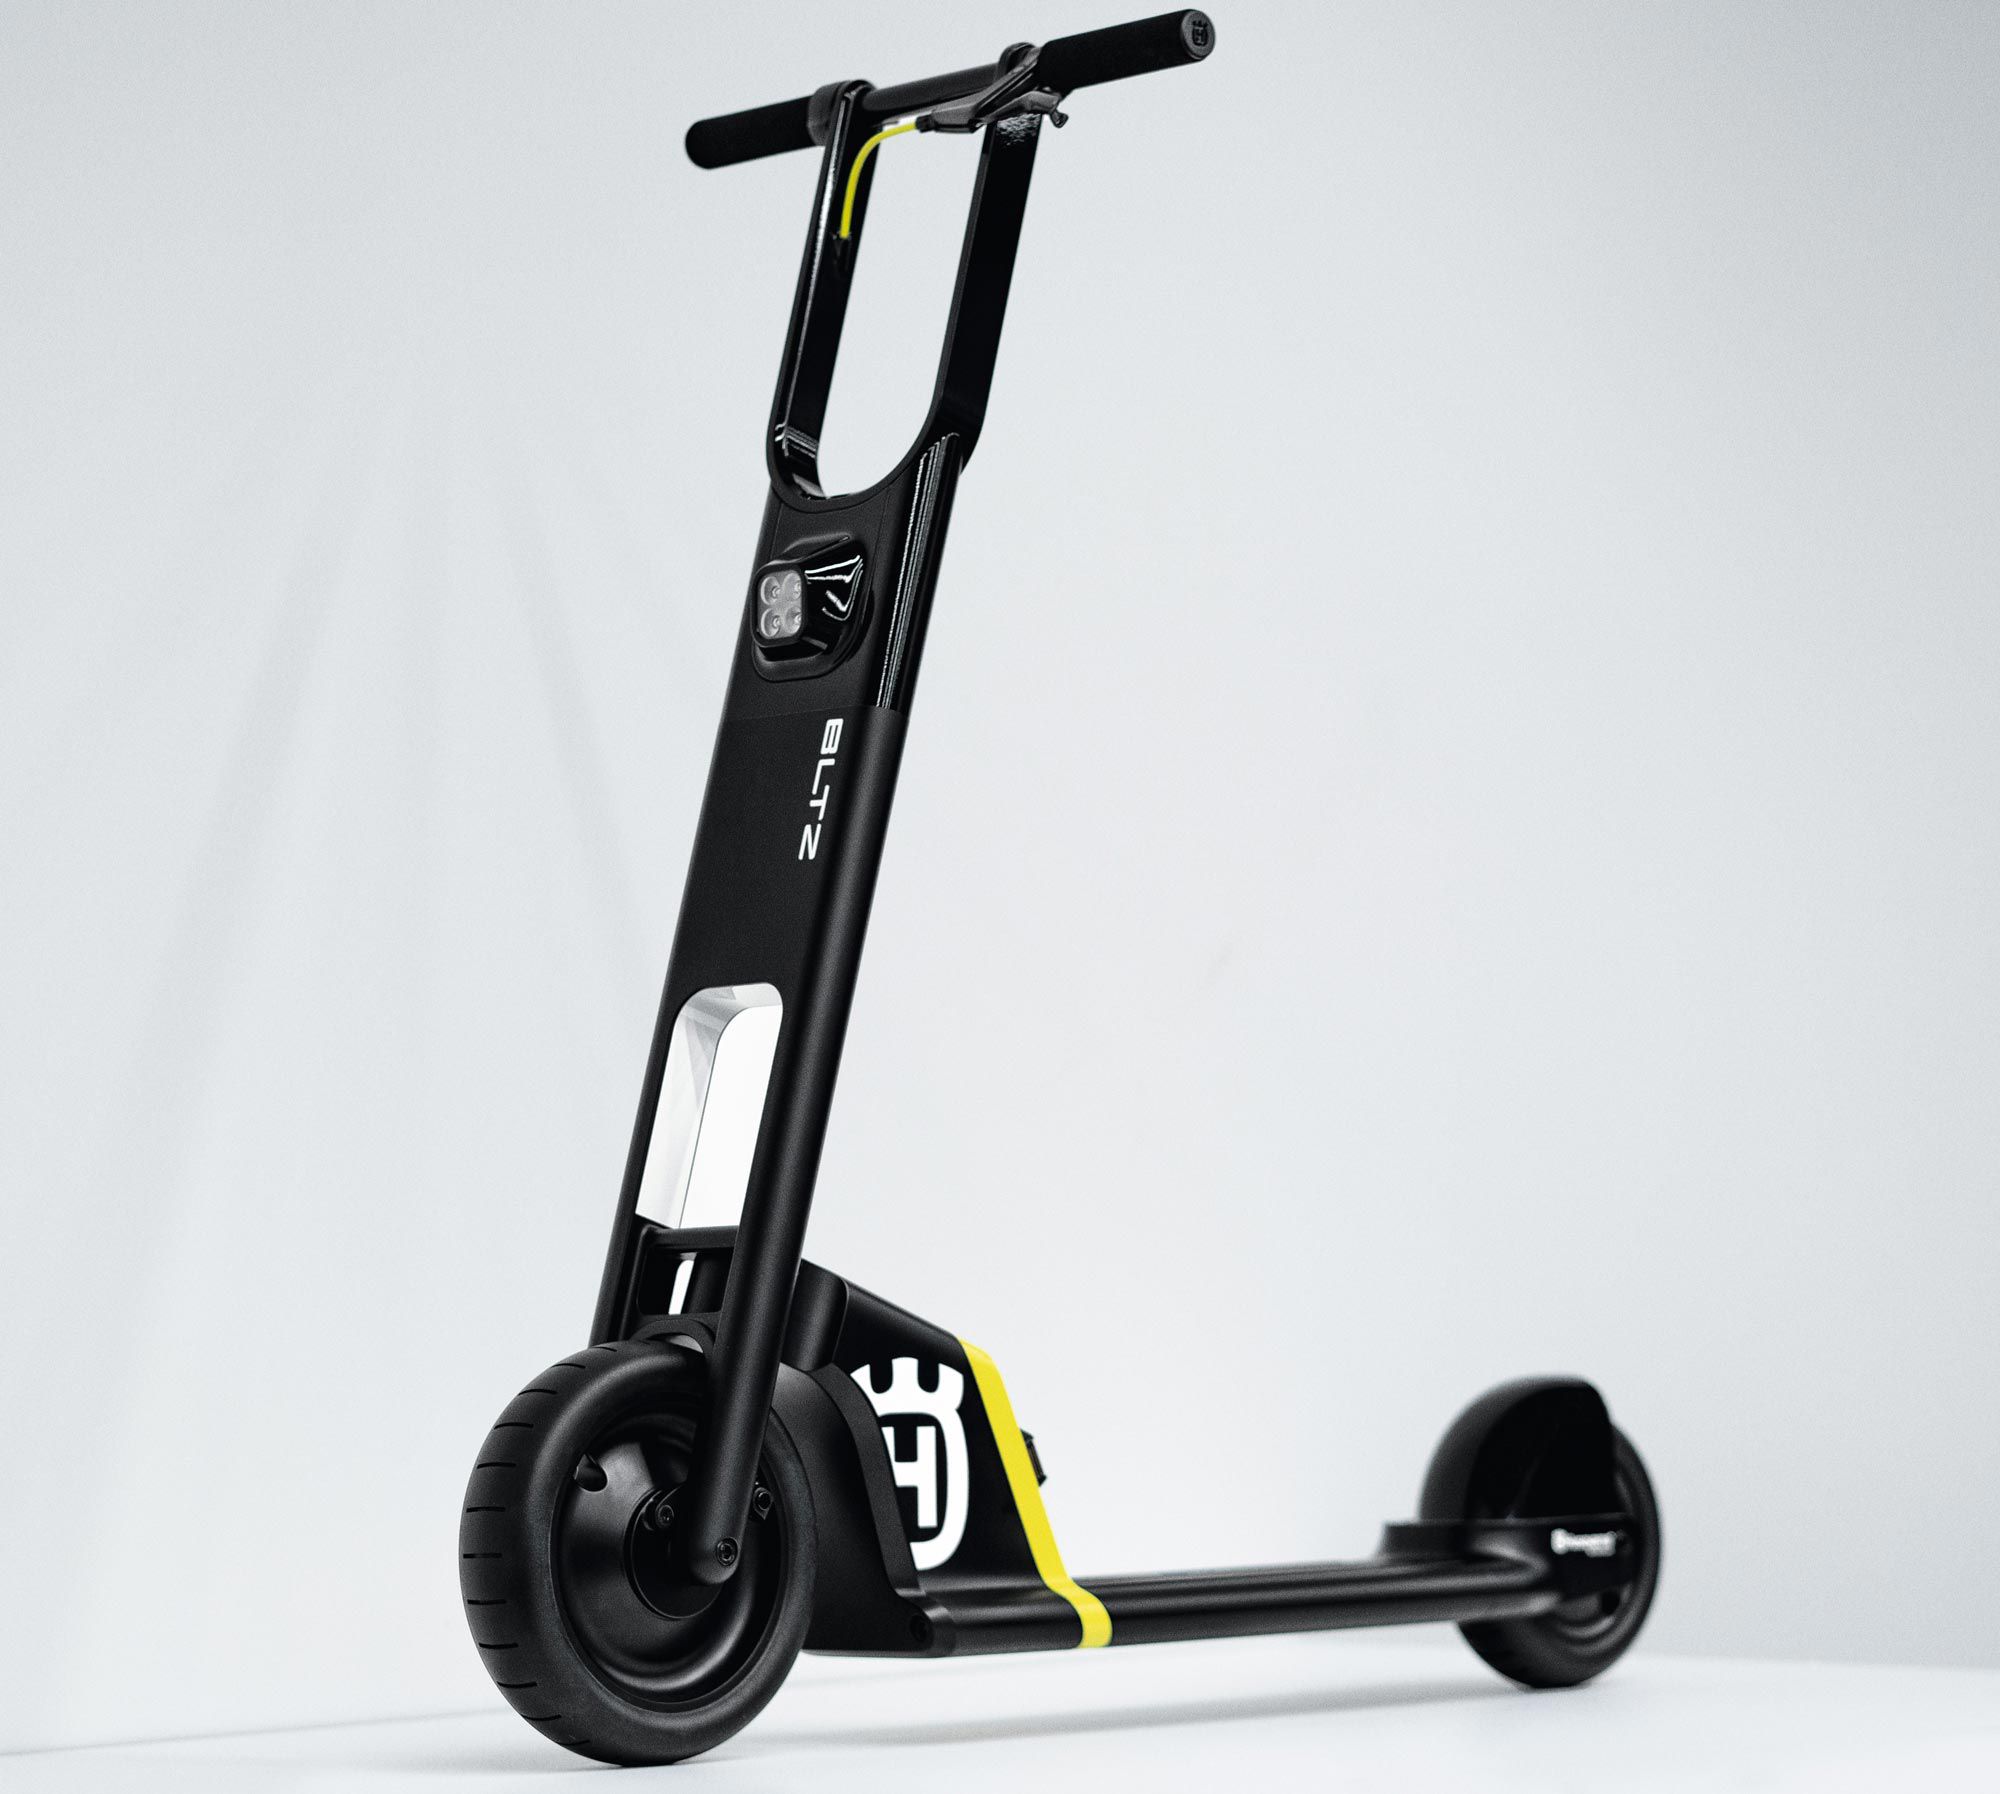 The Bltz is a stand-up electric scooter concept Husqvarna hopes will appeal to riders in congested urban areas.